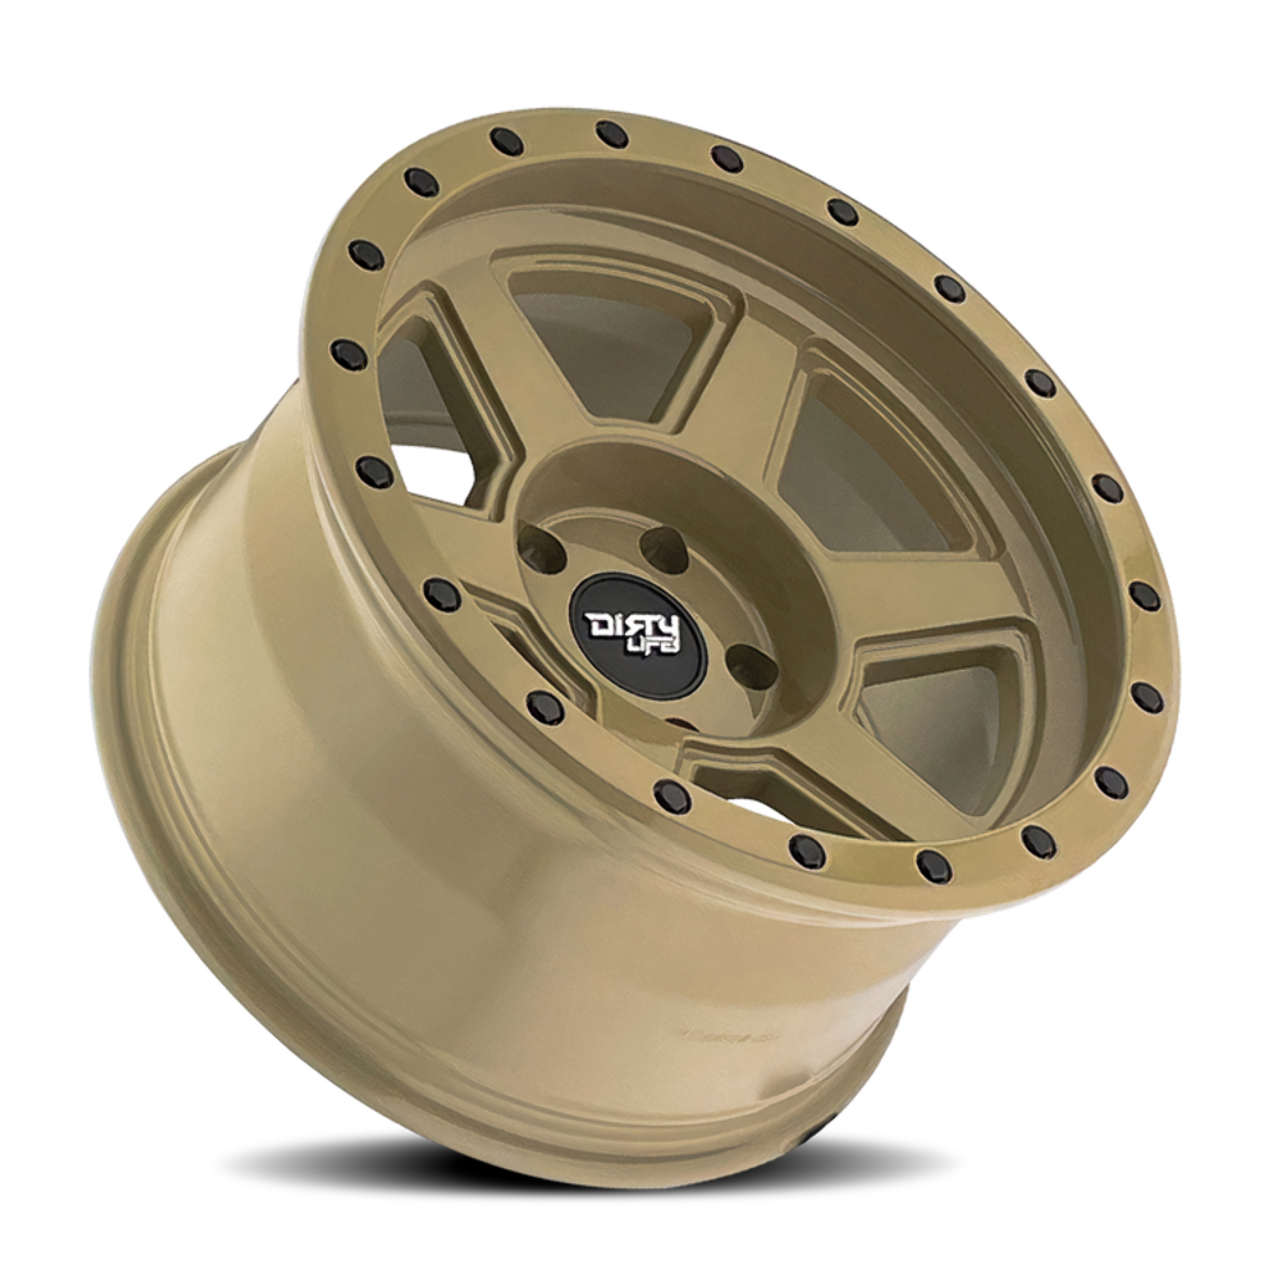 Set 4 17" Dirty Life Compound 17x9 Desert Sand 6x135 Wheels -12mm Lifted Rims